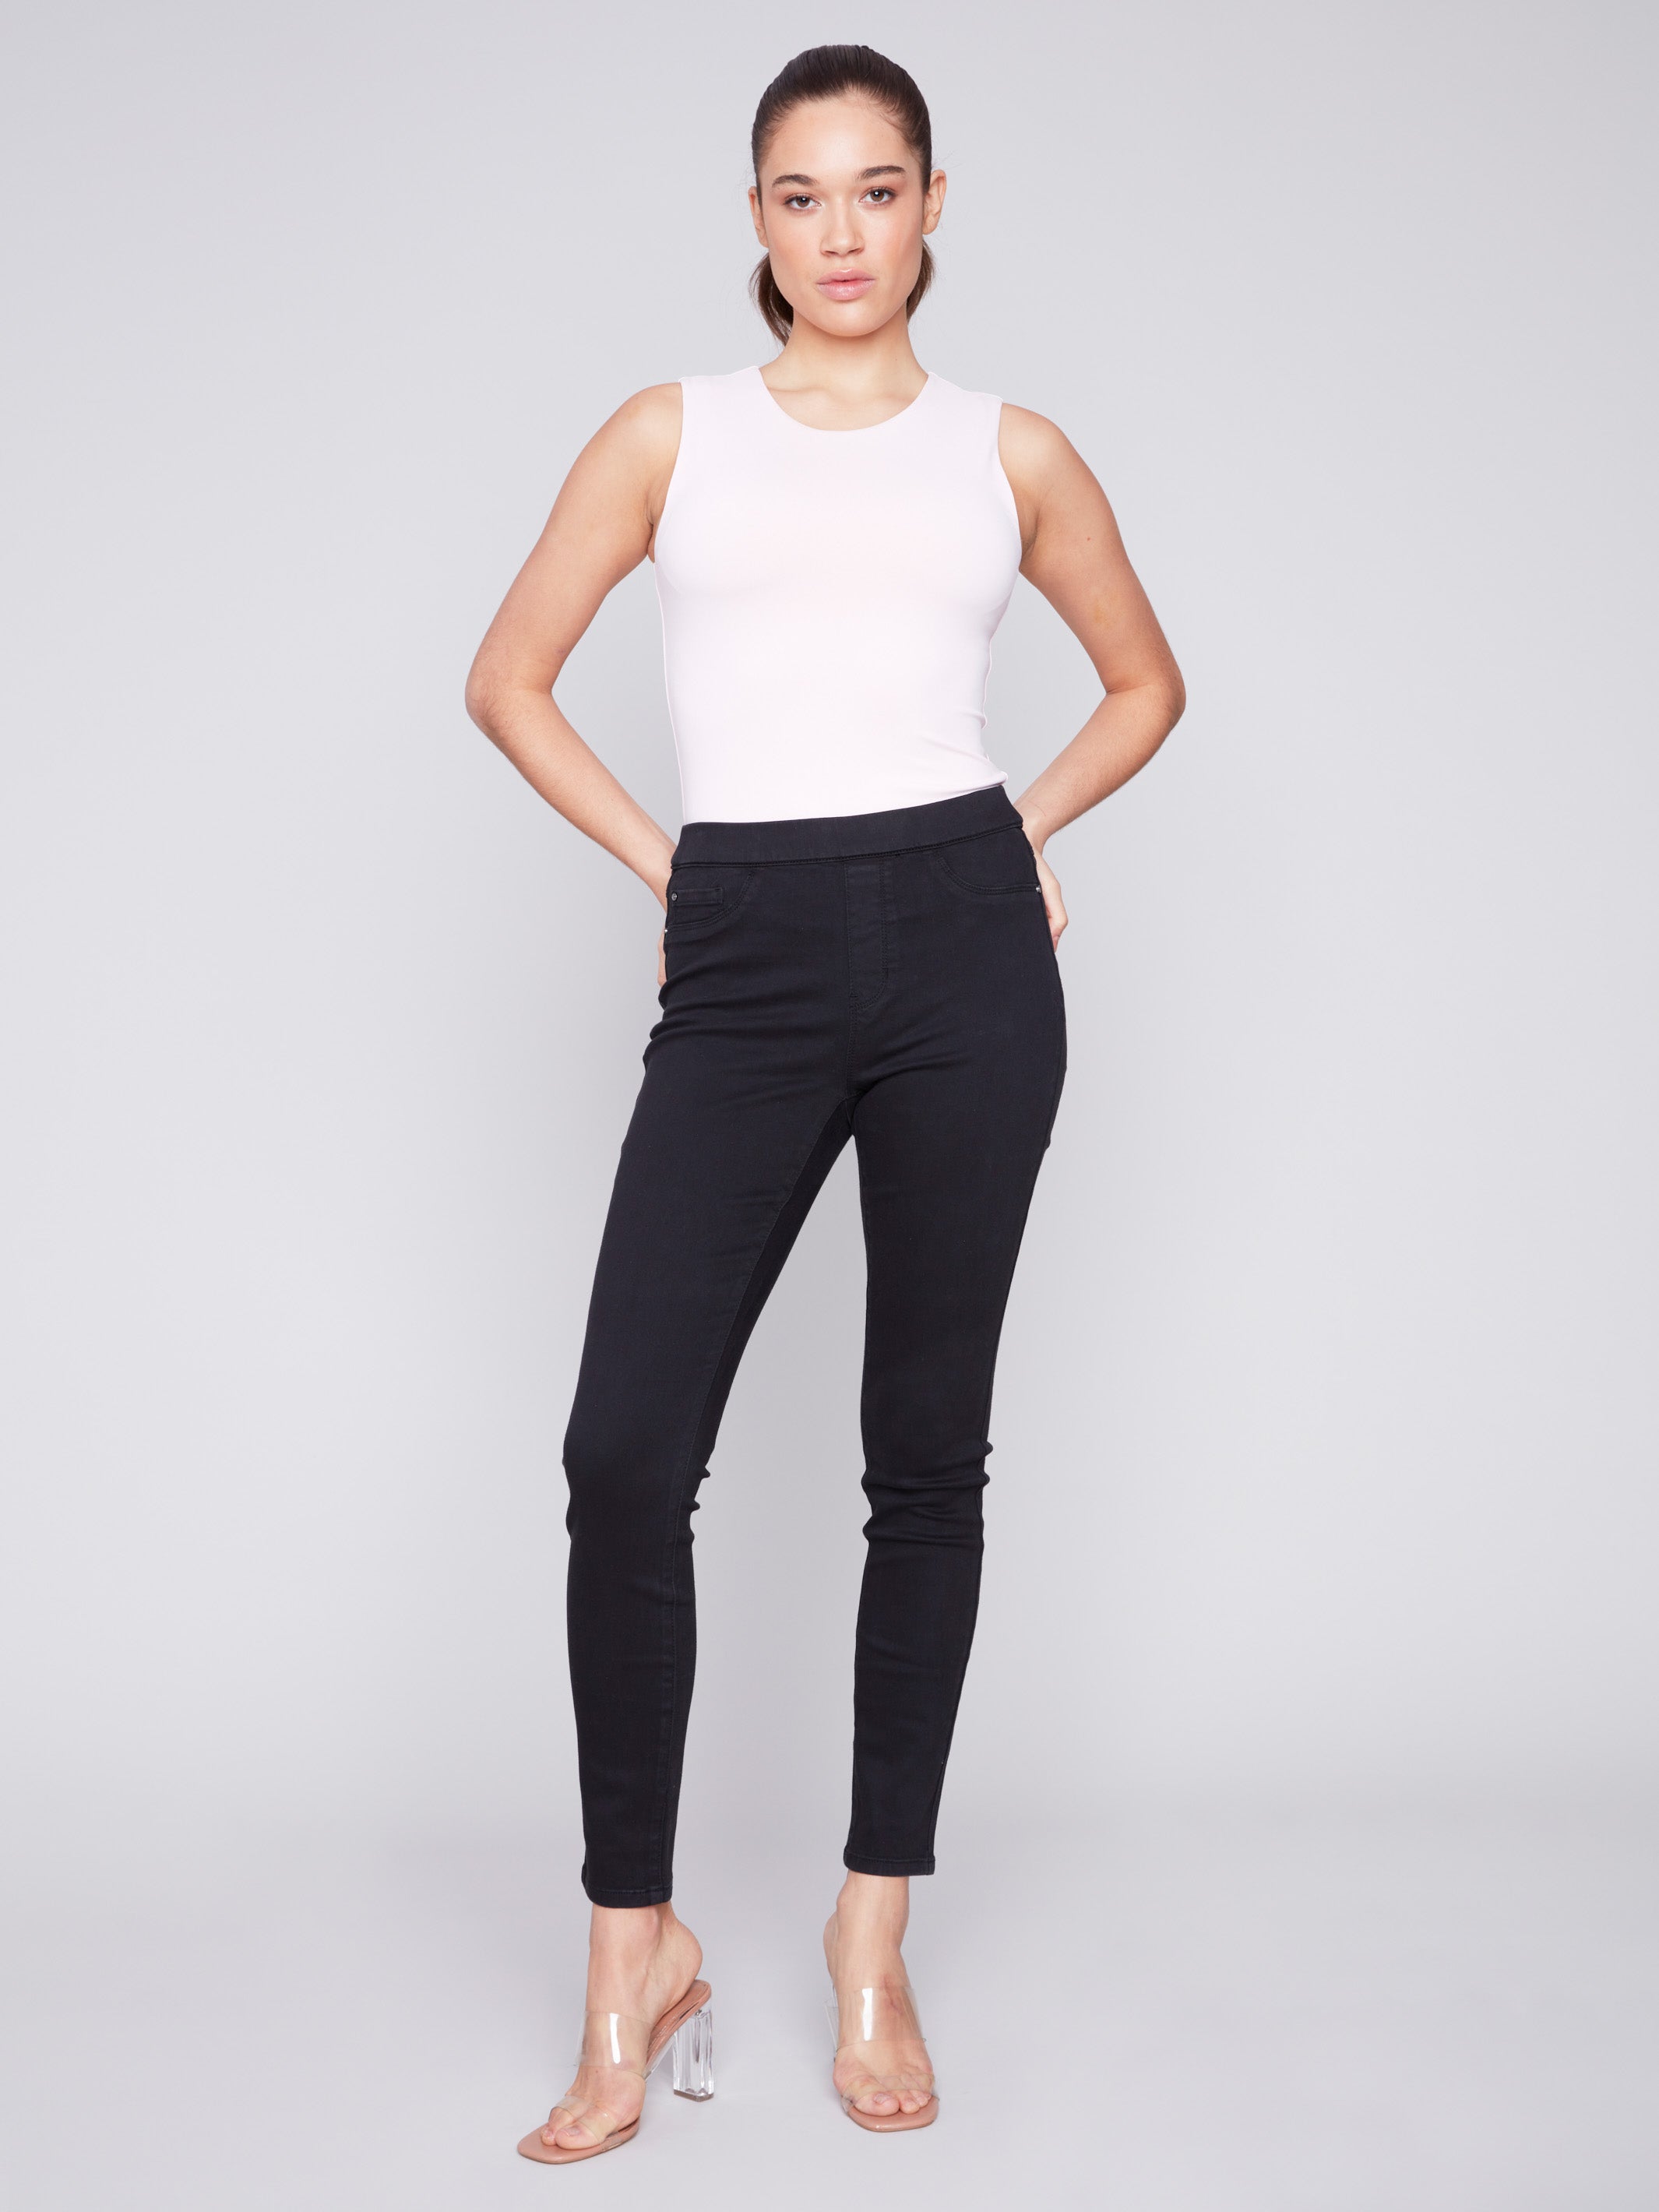 Twill Pull-On Pants - Black - Charlie B Collection Canada - Image 6